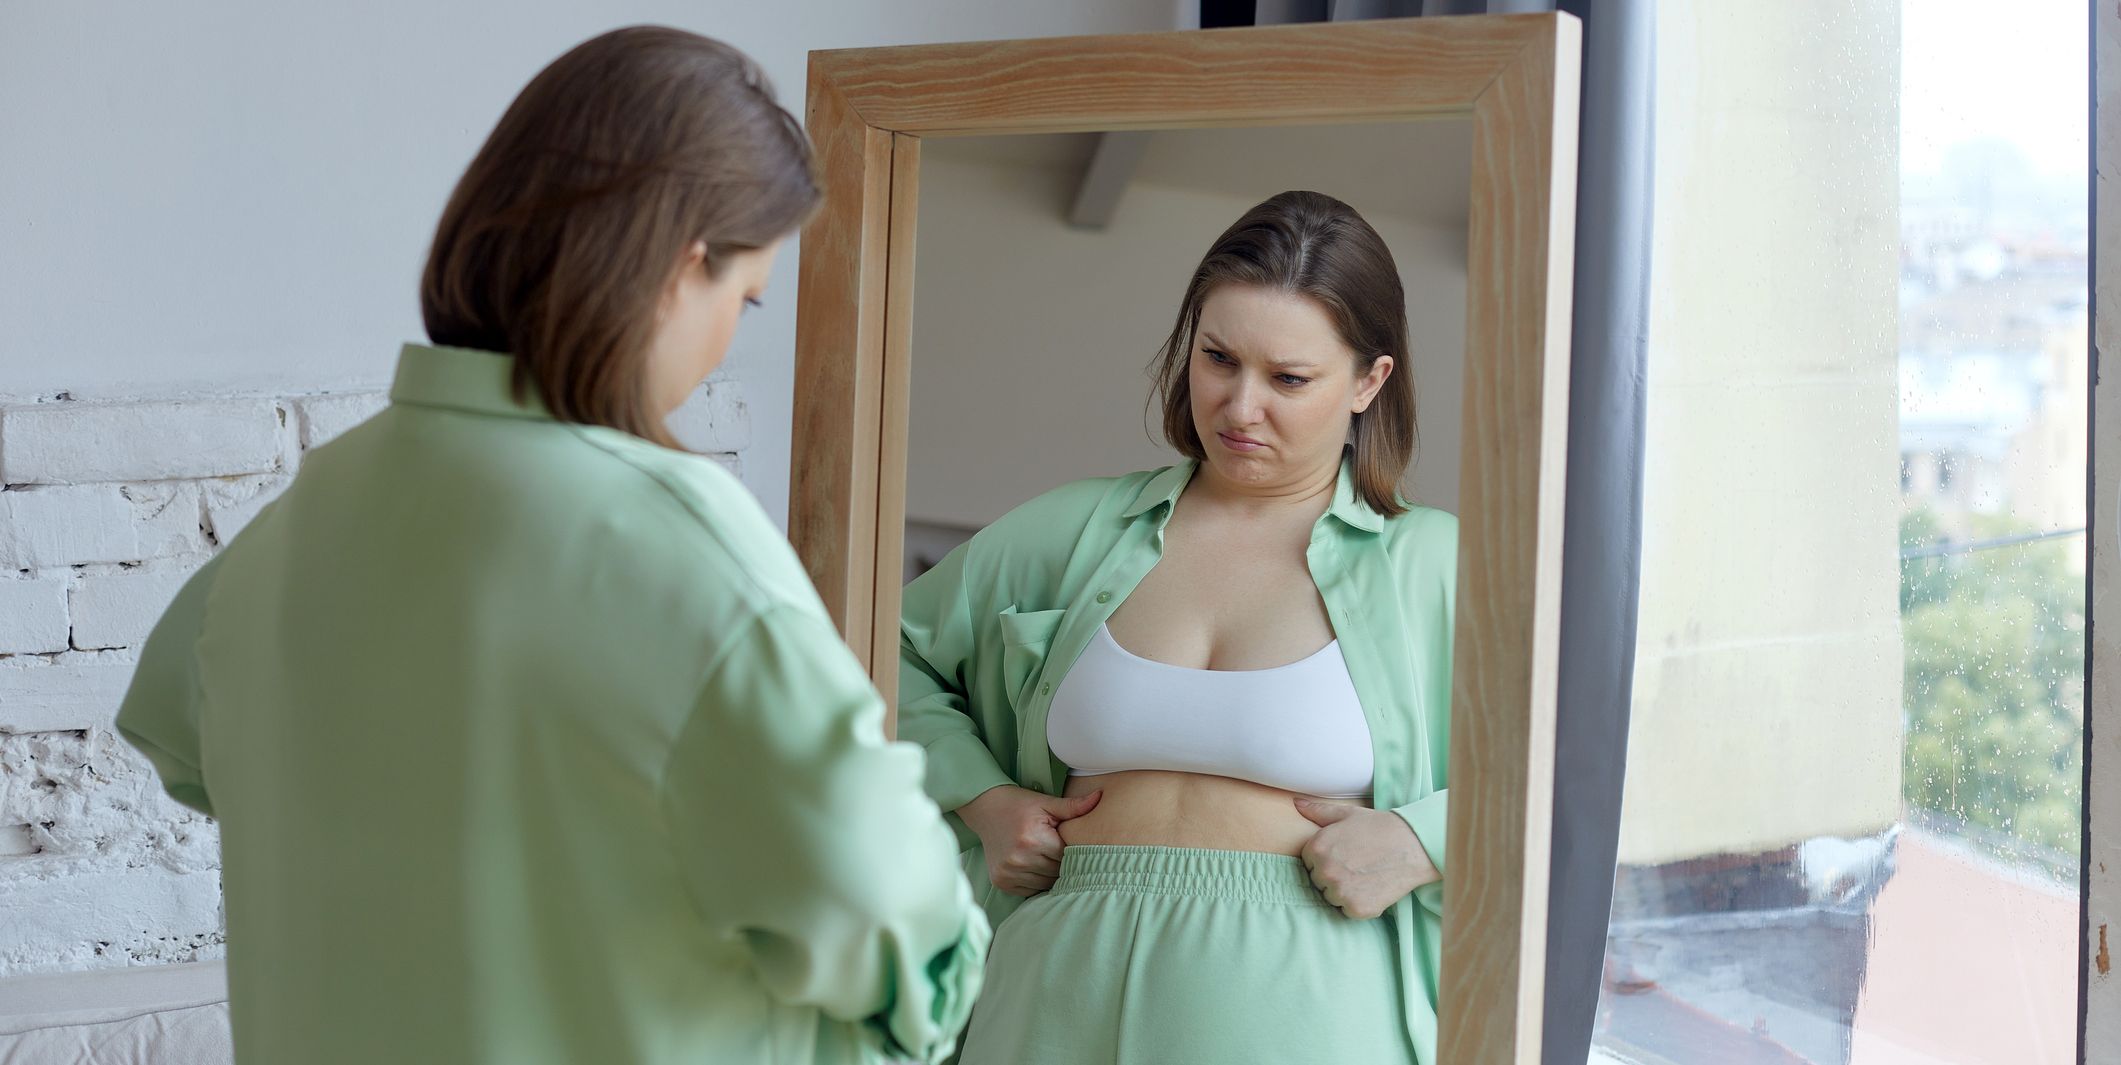 size plus woman looking by reflection in mirror feels frustrated and dissatisfied by overweight